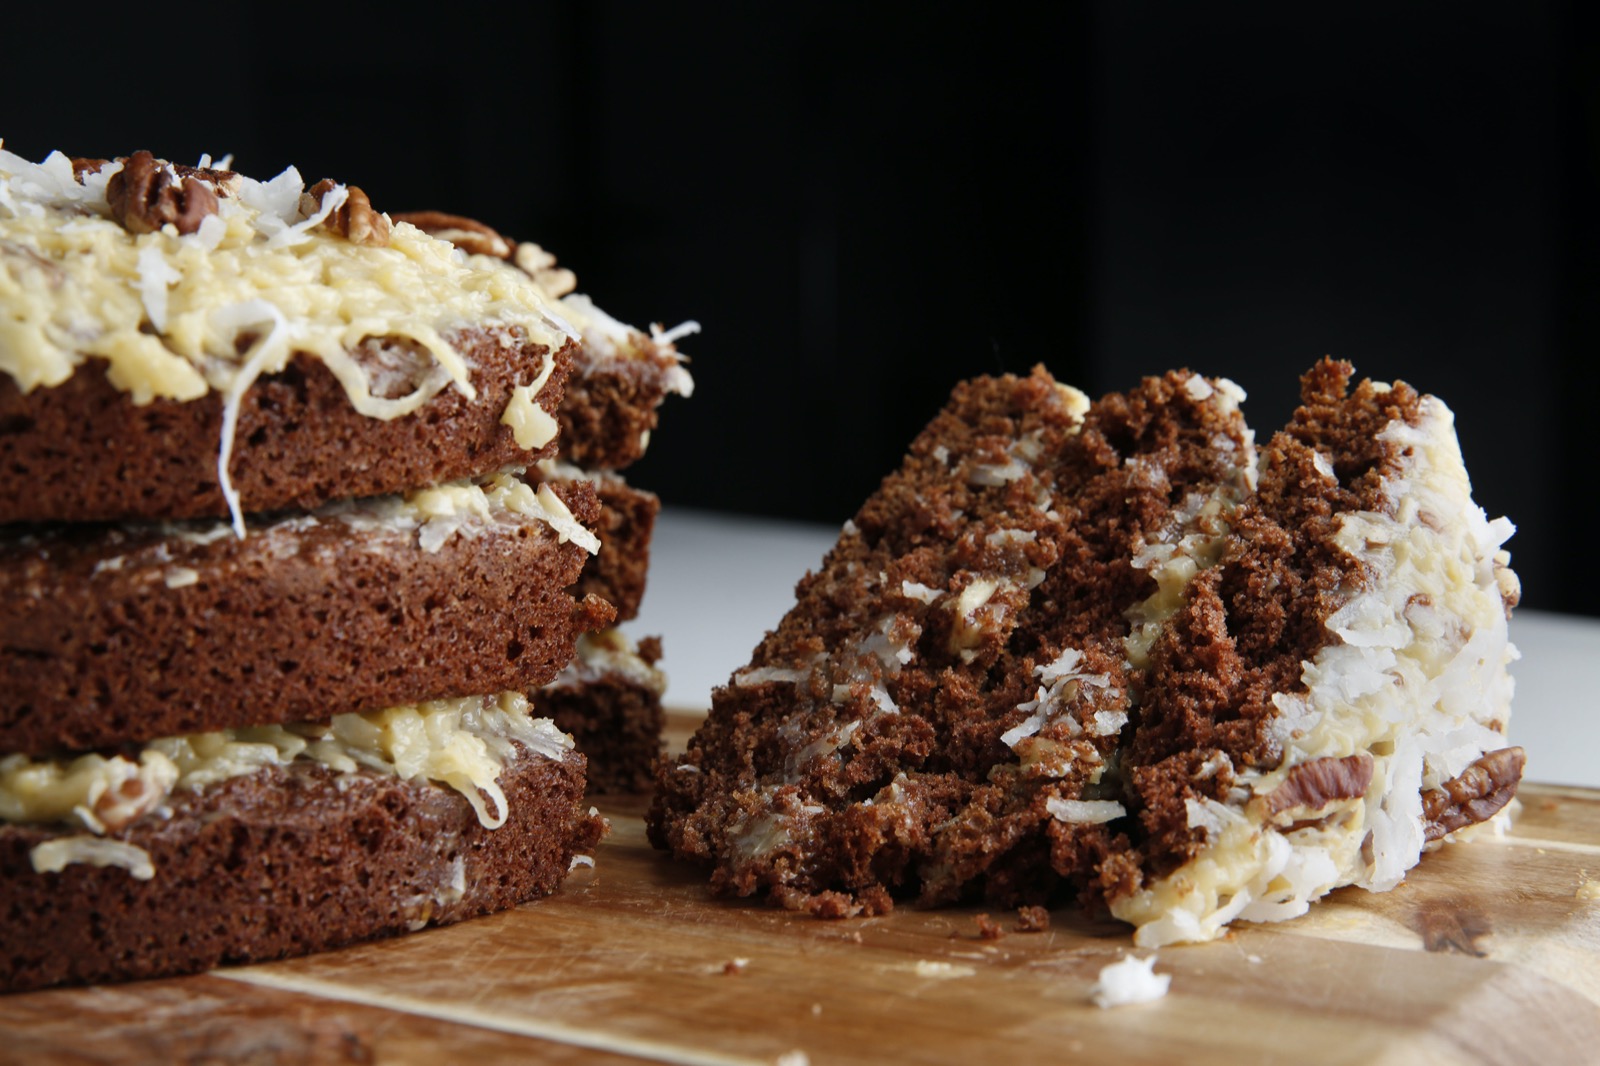 Do You Actually Prefer American or French Desserts? German Chocolate Cake